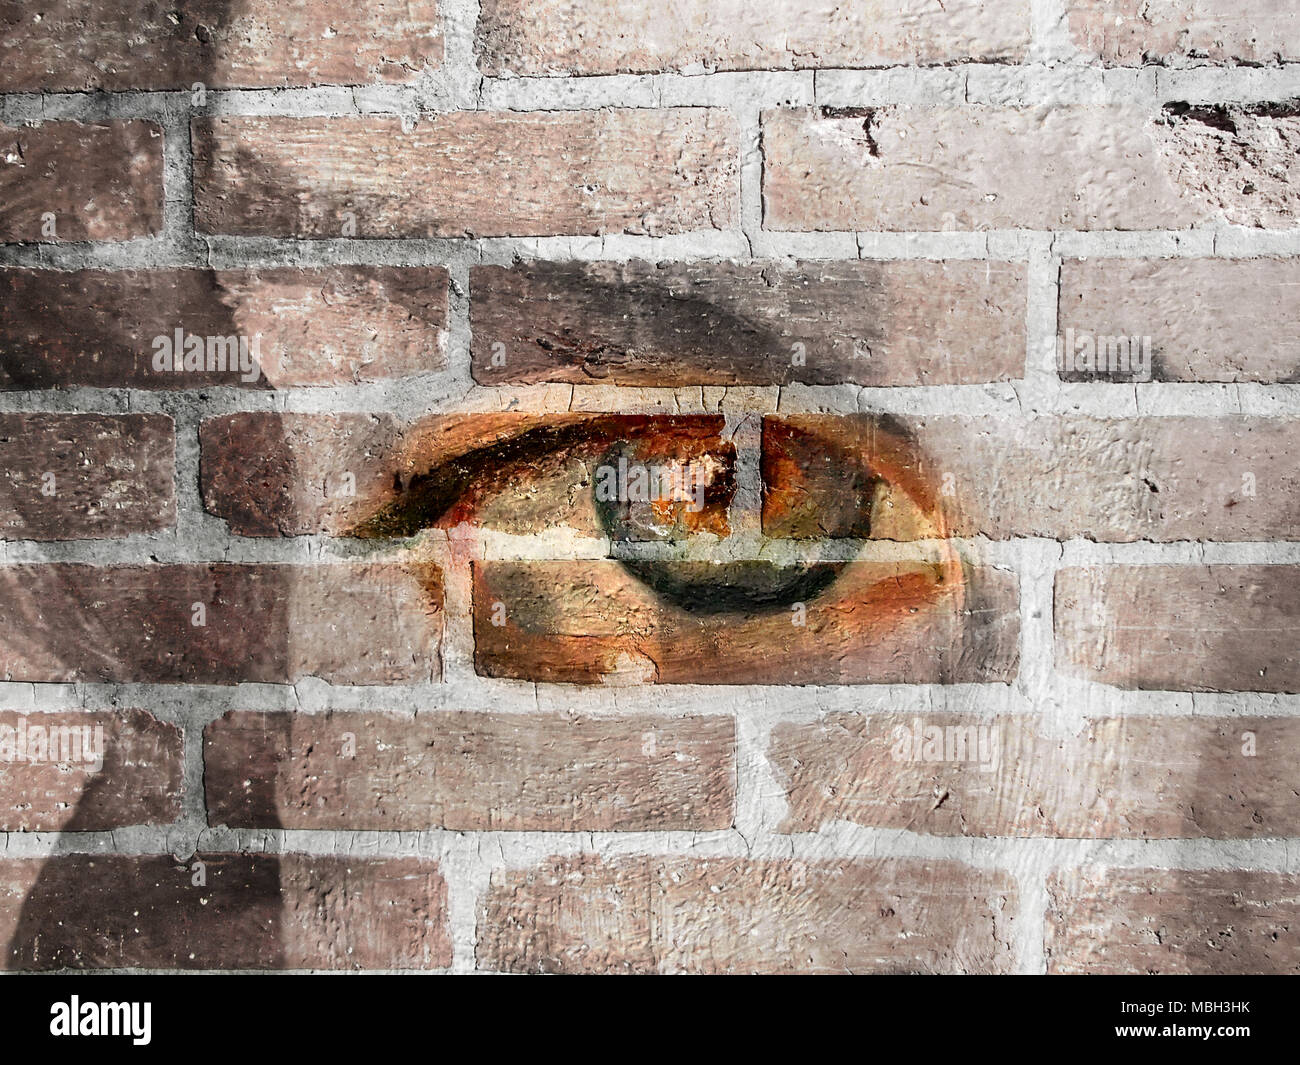 Textured and Painted Eye on Wall Stock Photo